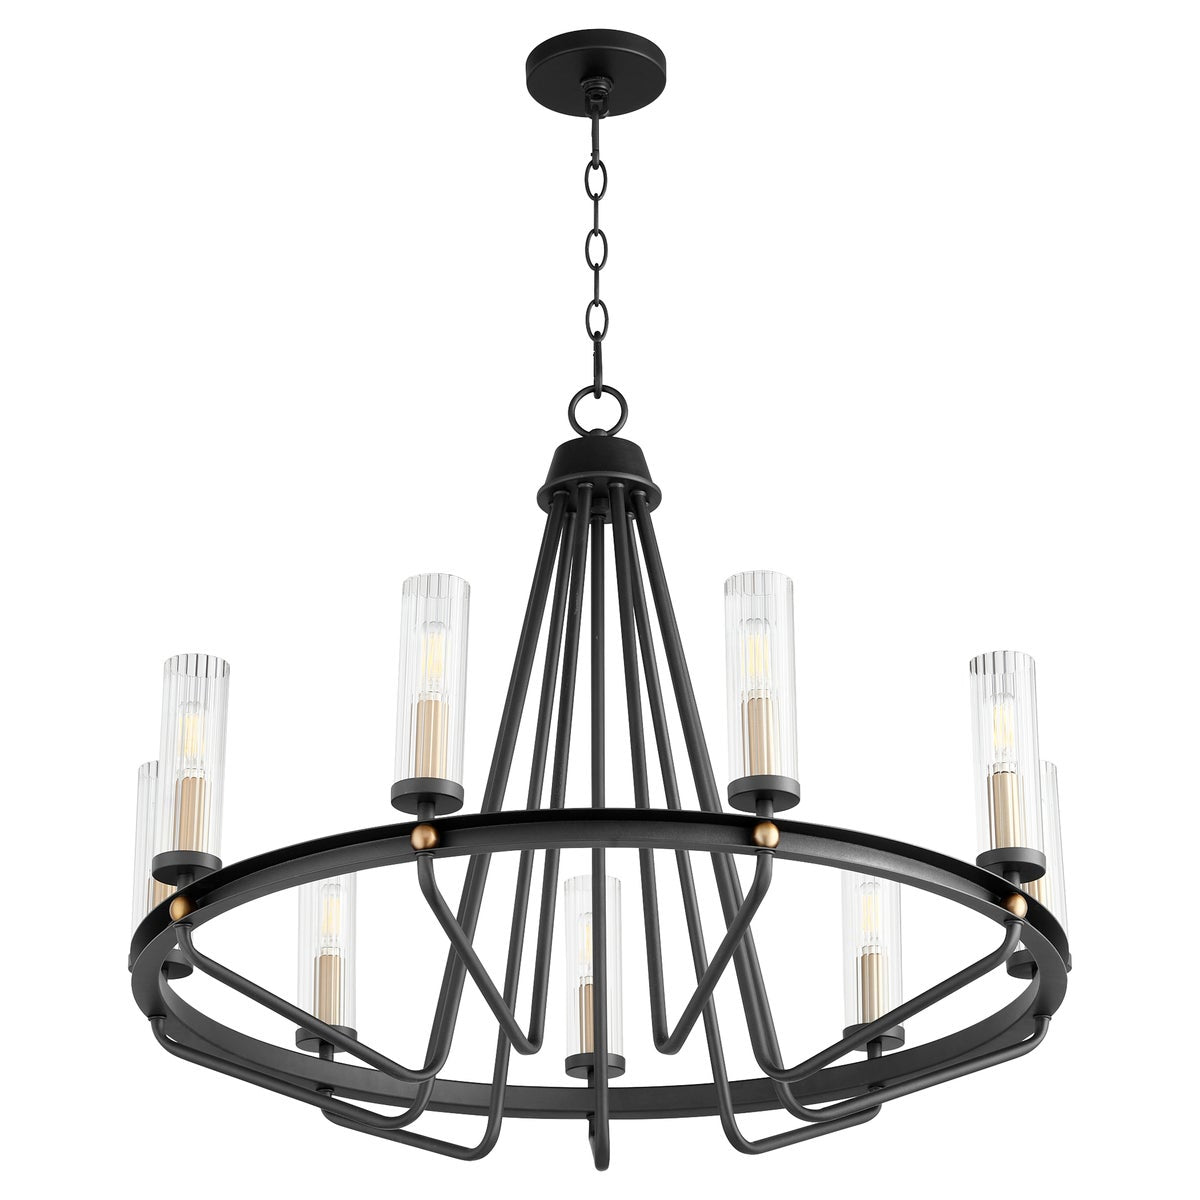 A black chandelier with clear glass bulbs, exuding interior extravagance. Enhance any space with this modern ring chandelier's radiant lighting quality. Quorum International's Ring Chandelier, 30"W x 25"H, 9 bulbs, dimmable, UL Listed.